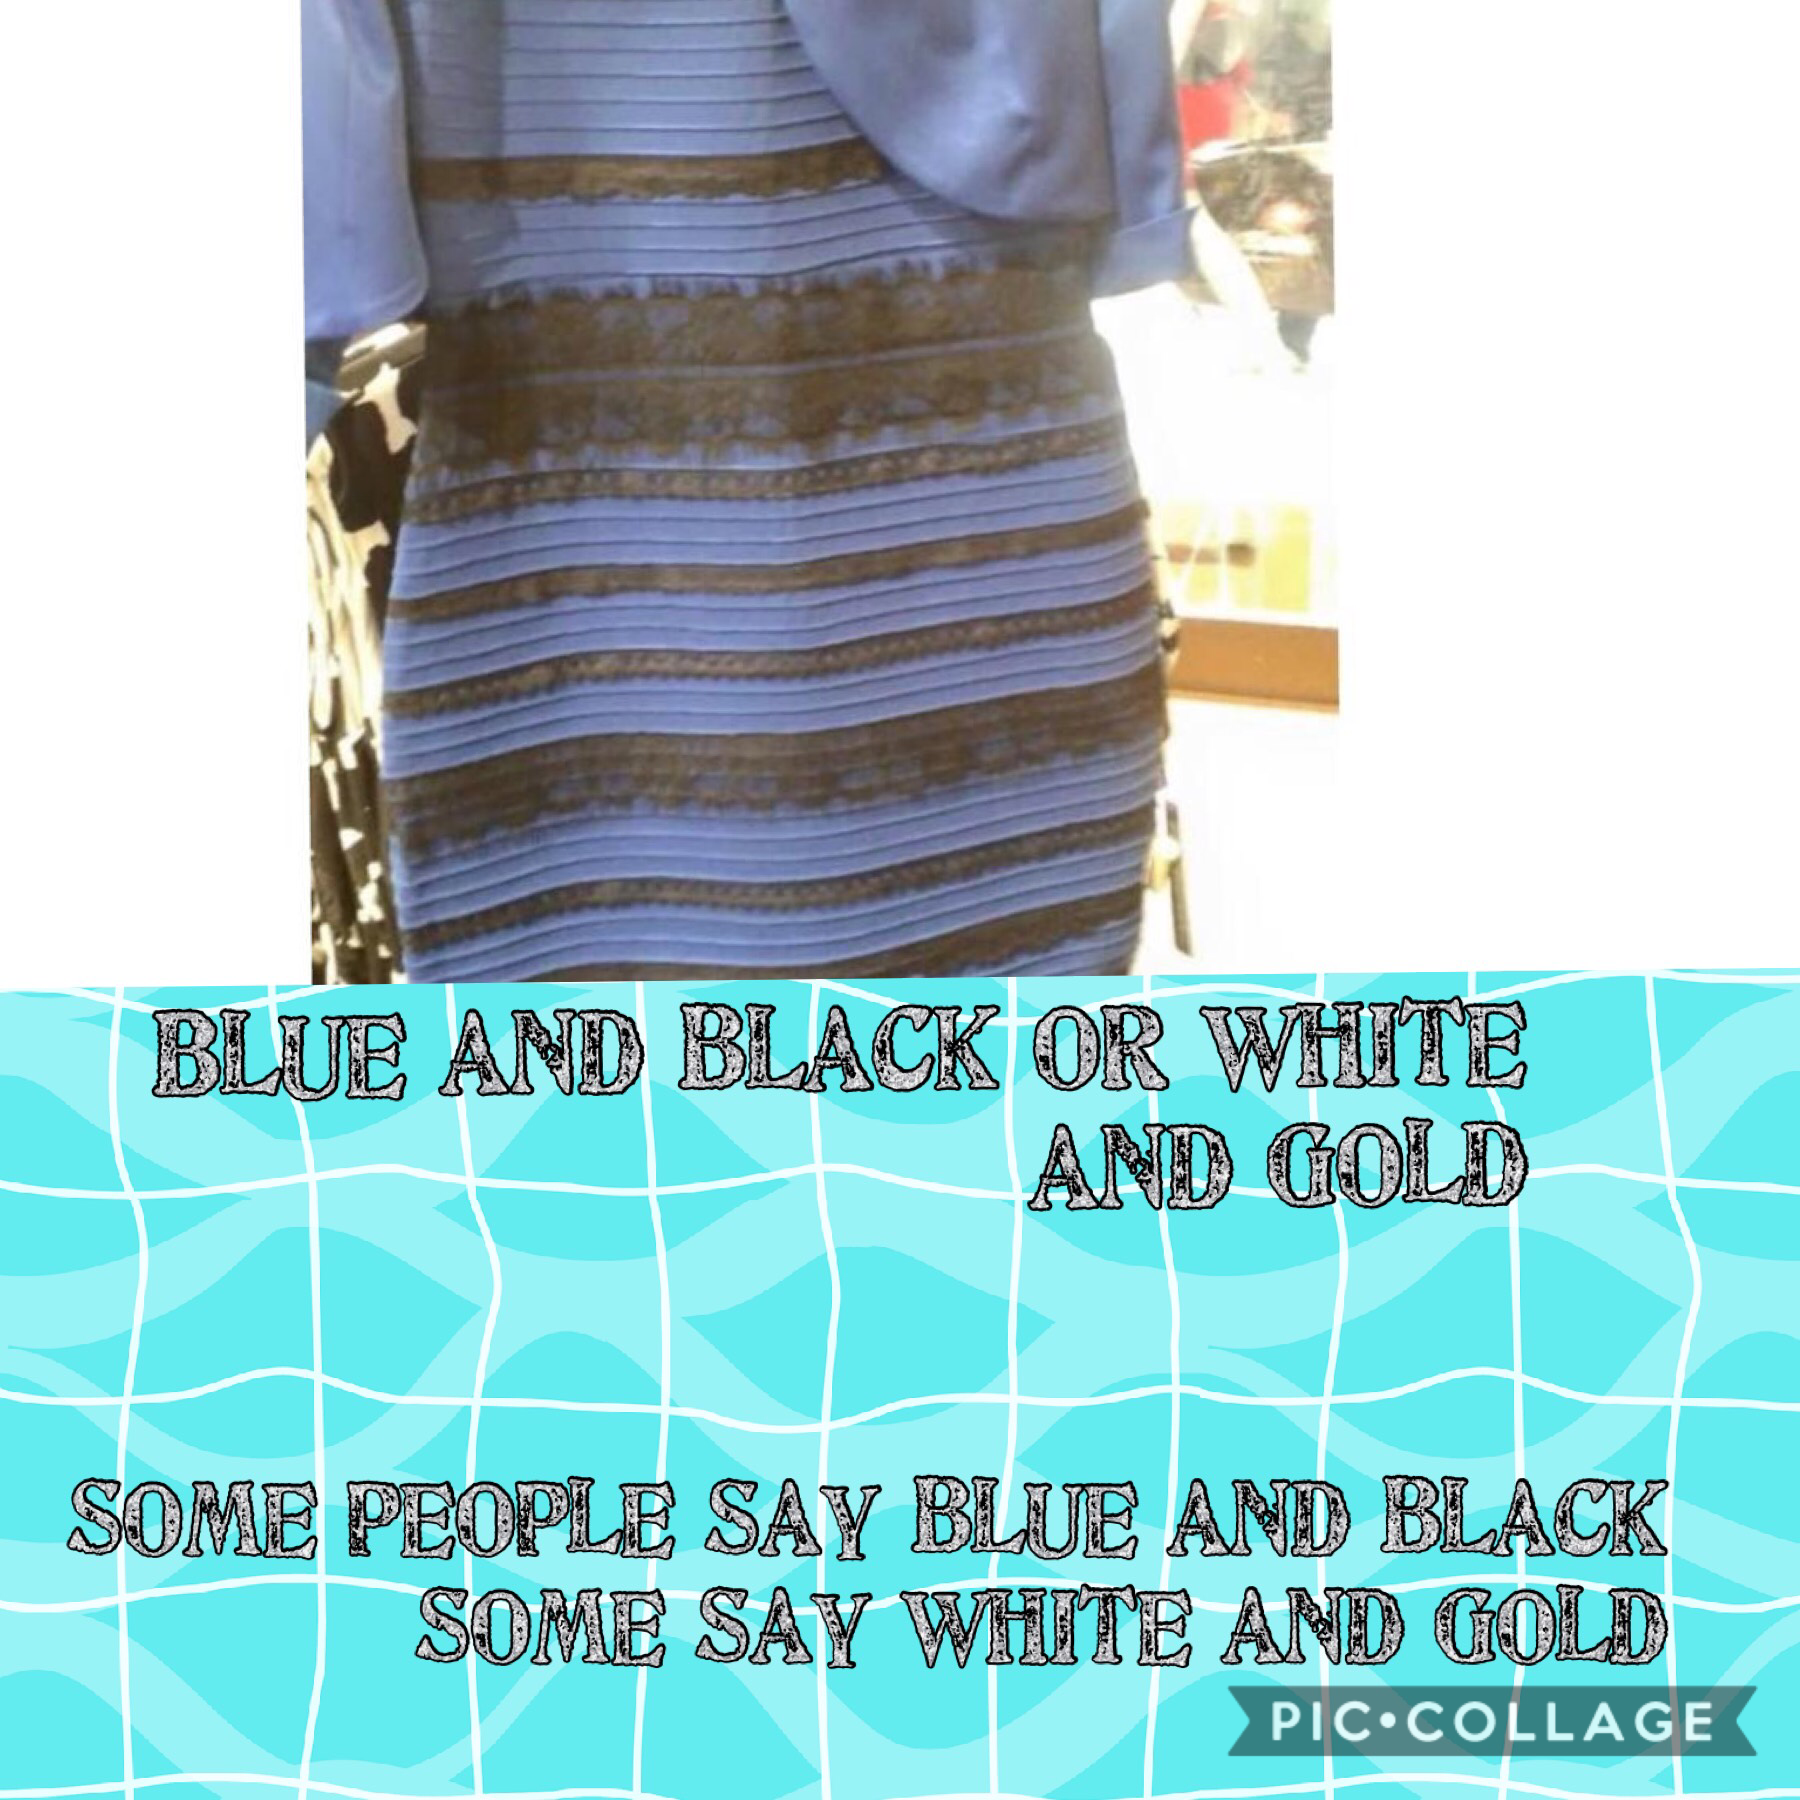 I see white and gold